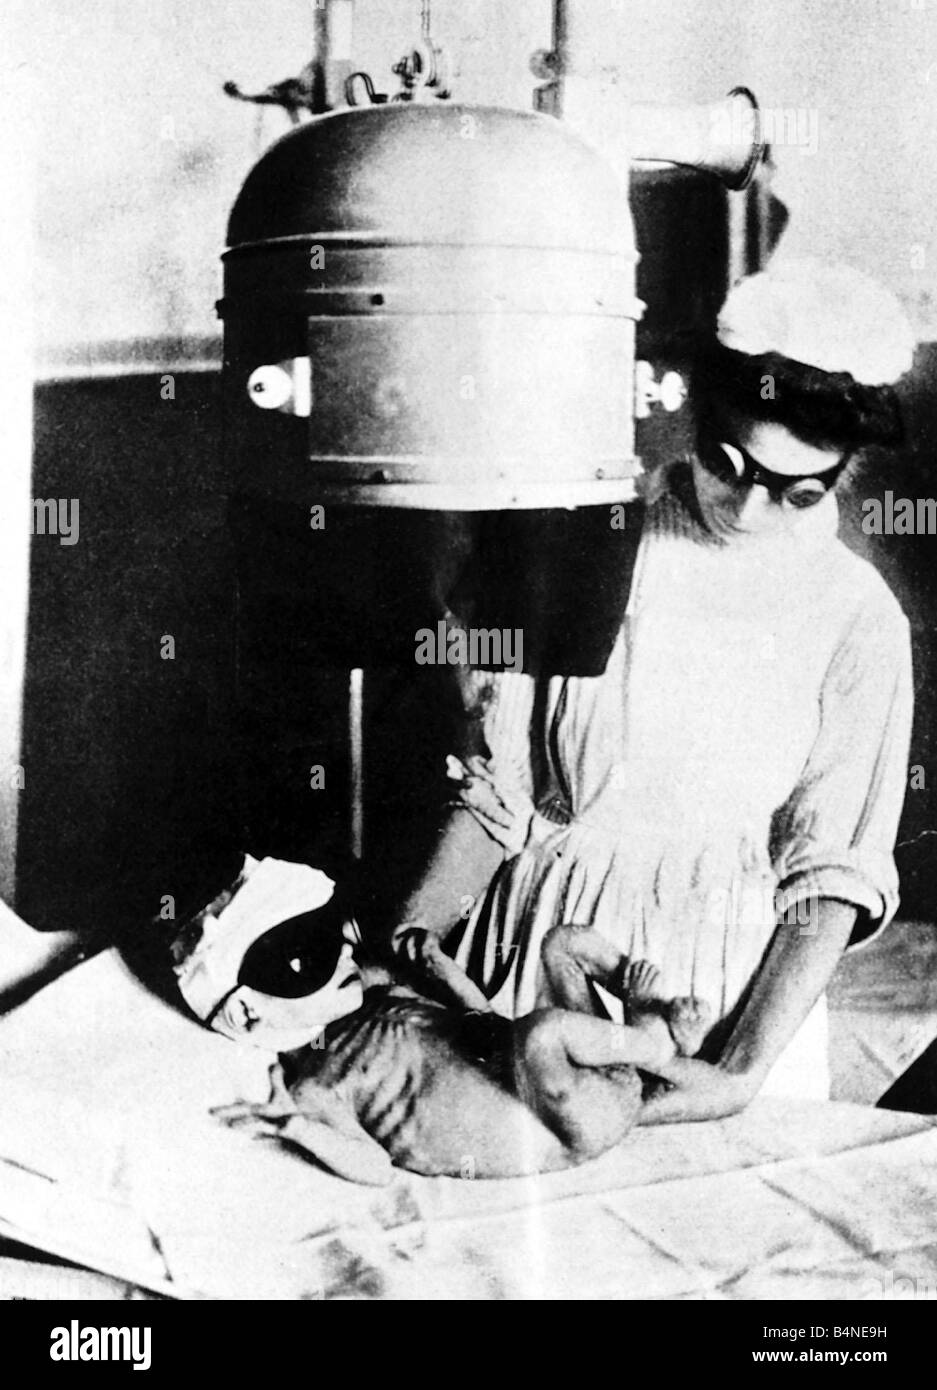 World War One A nurse working for the Save The Children Fund wearing protective goggles x rays an under nourished baby during the Great War Circa 1915 Stock Photo